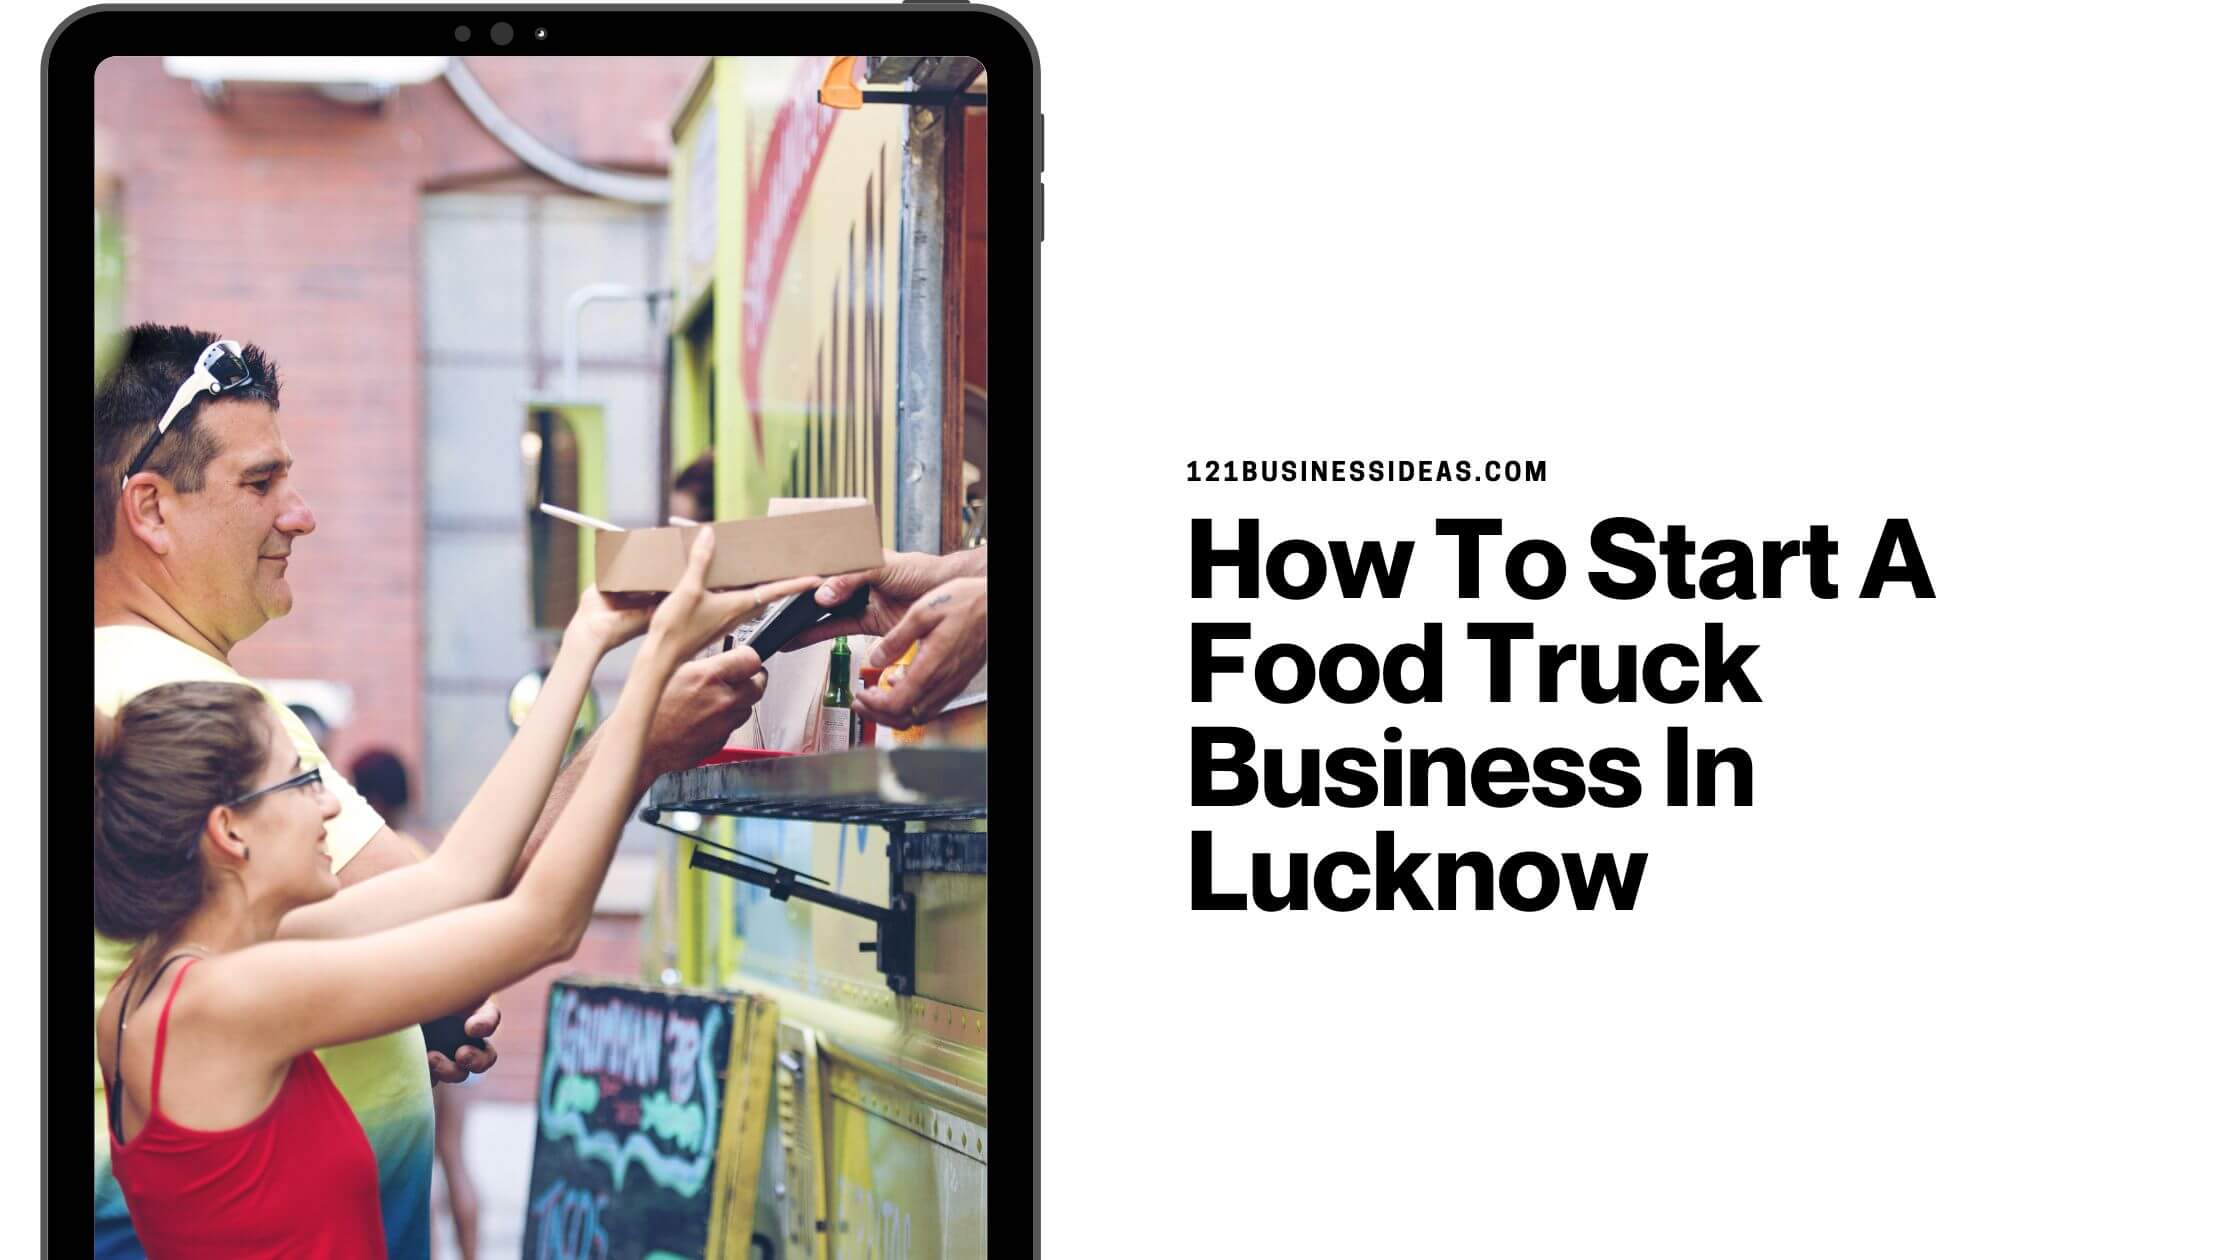 How To Start A Food Truck Business In Lucknow (1)